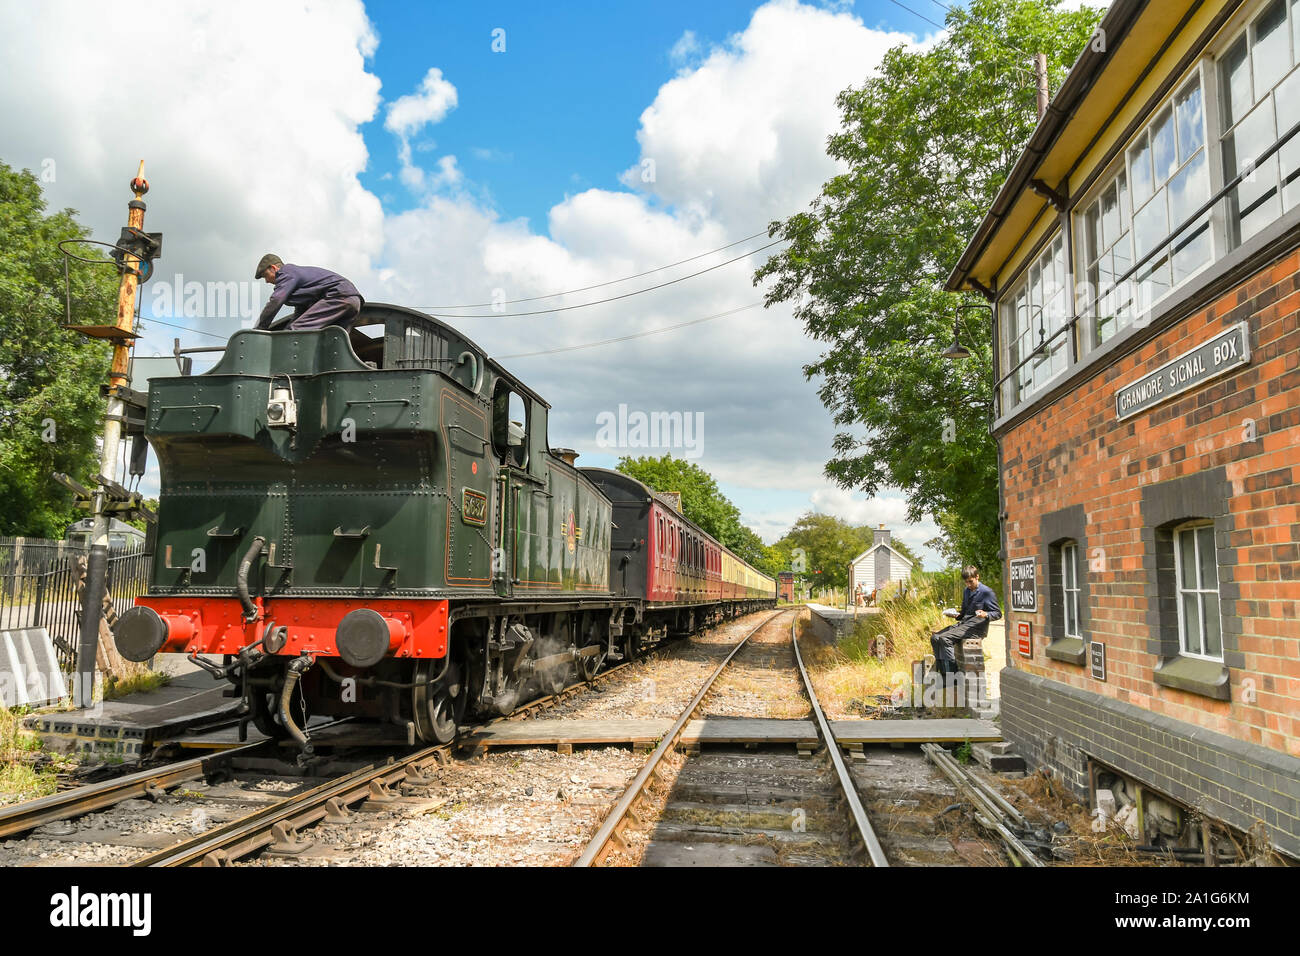 CRANMORE, ENGLAND - JULY 2019: Steam engine fireman climbing on the coal tender of the locomotive at Cranmore Station on the East Somerset Railway. Stock Photo